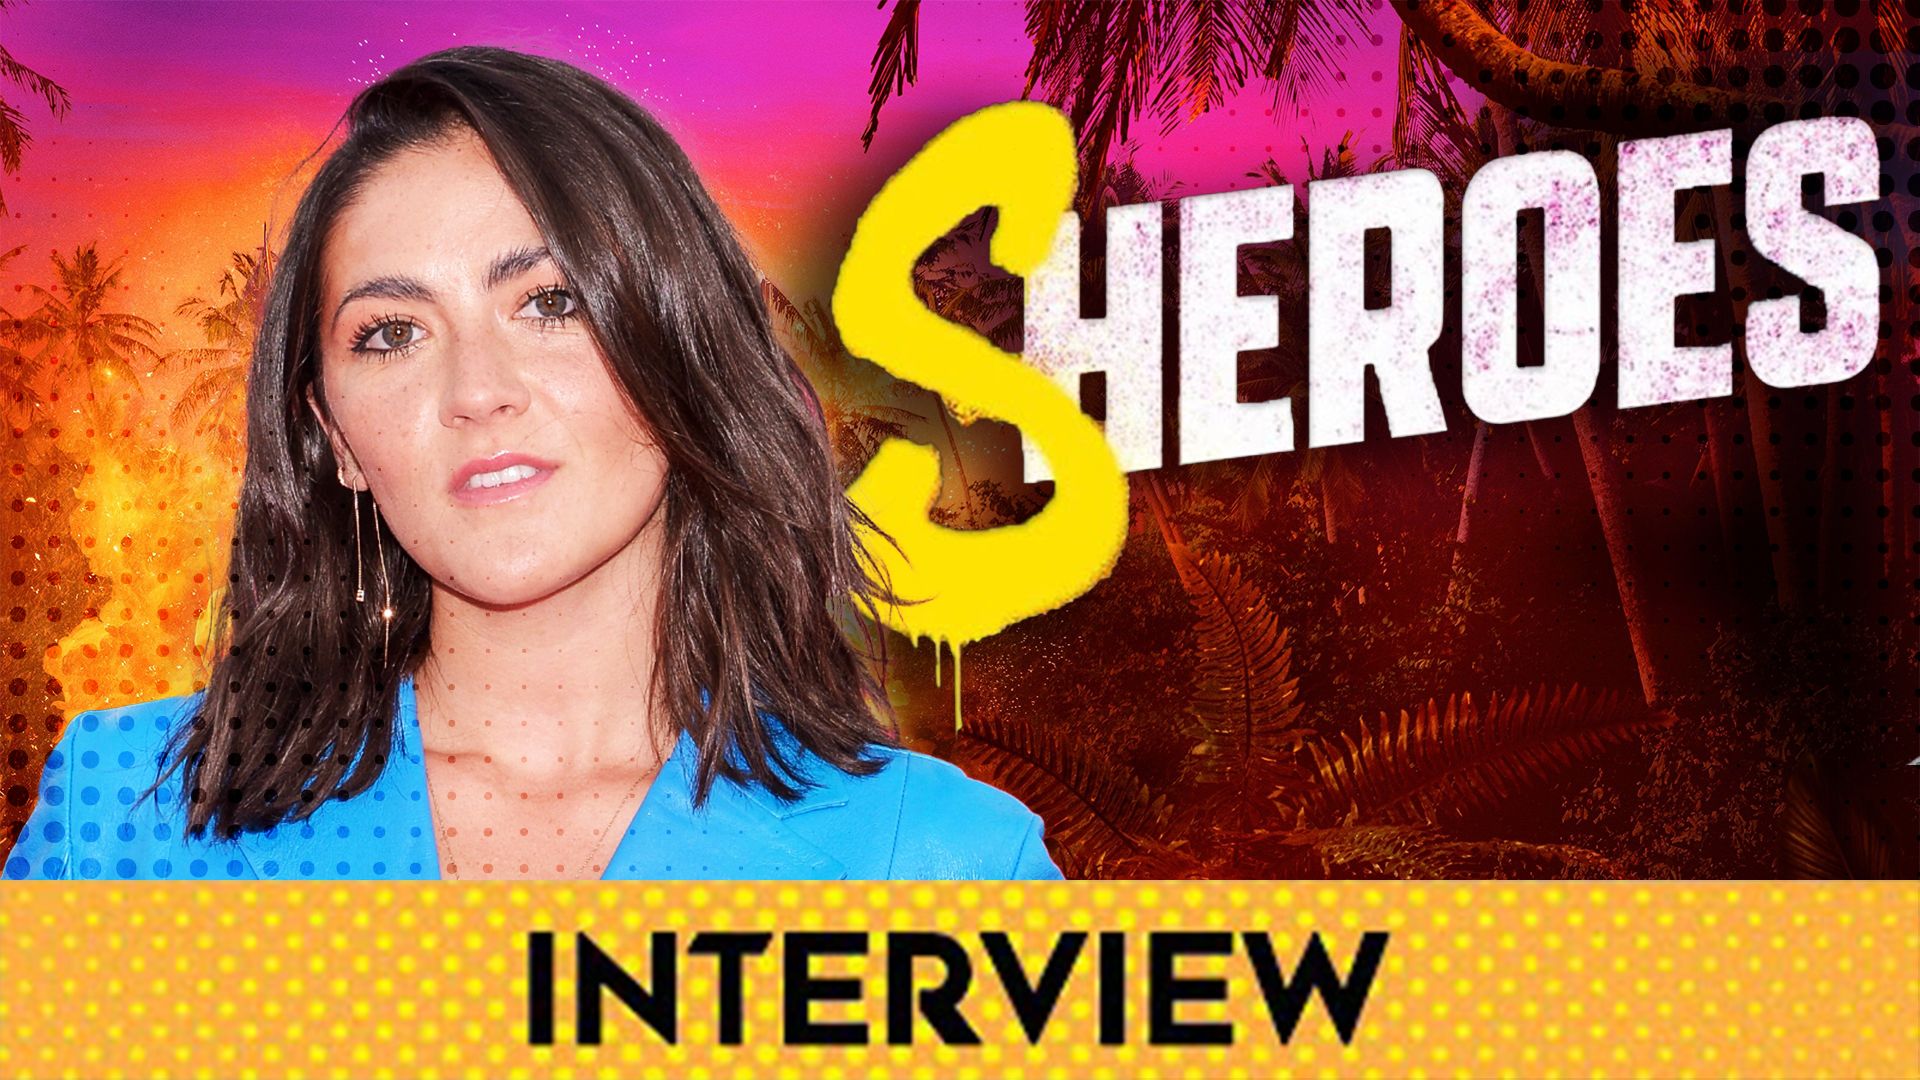 Isabelle Fuhrman talks with CBR about Sheroes